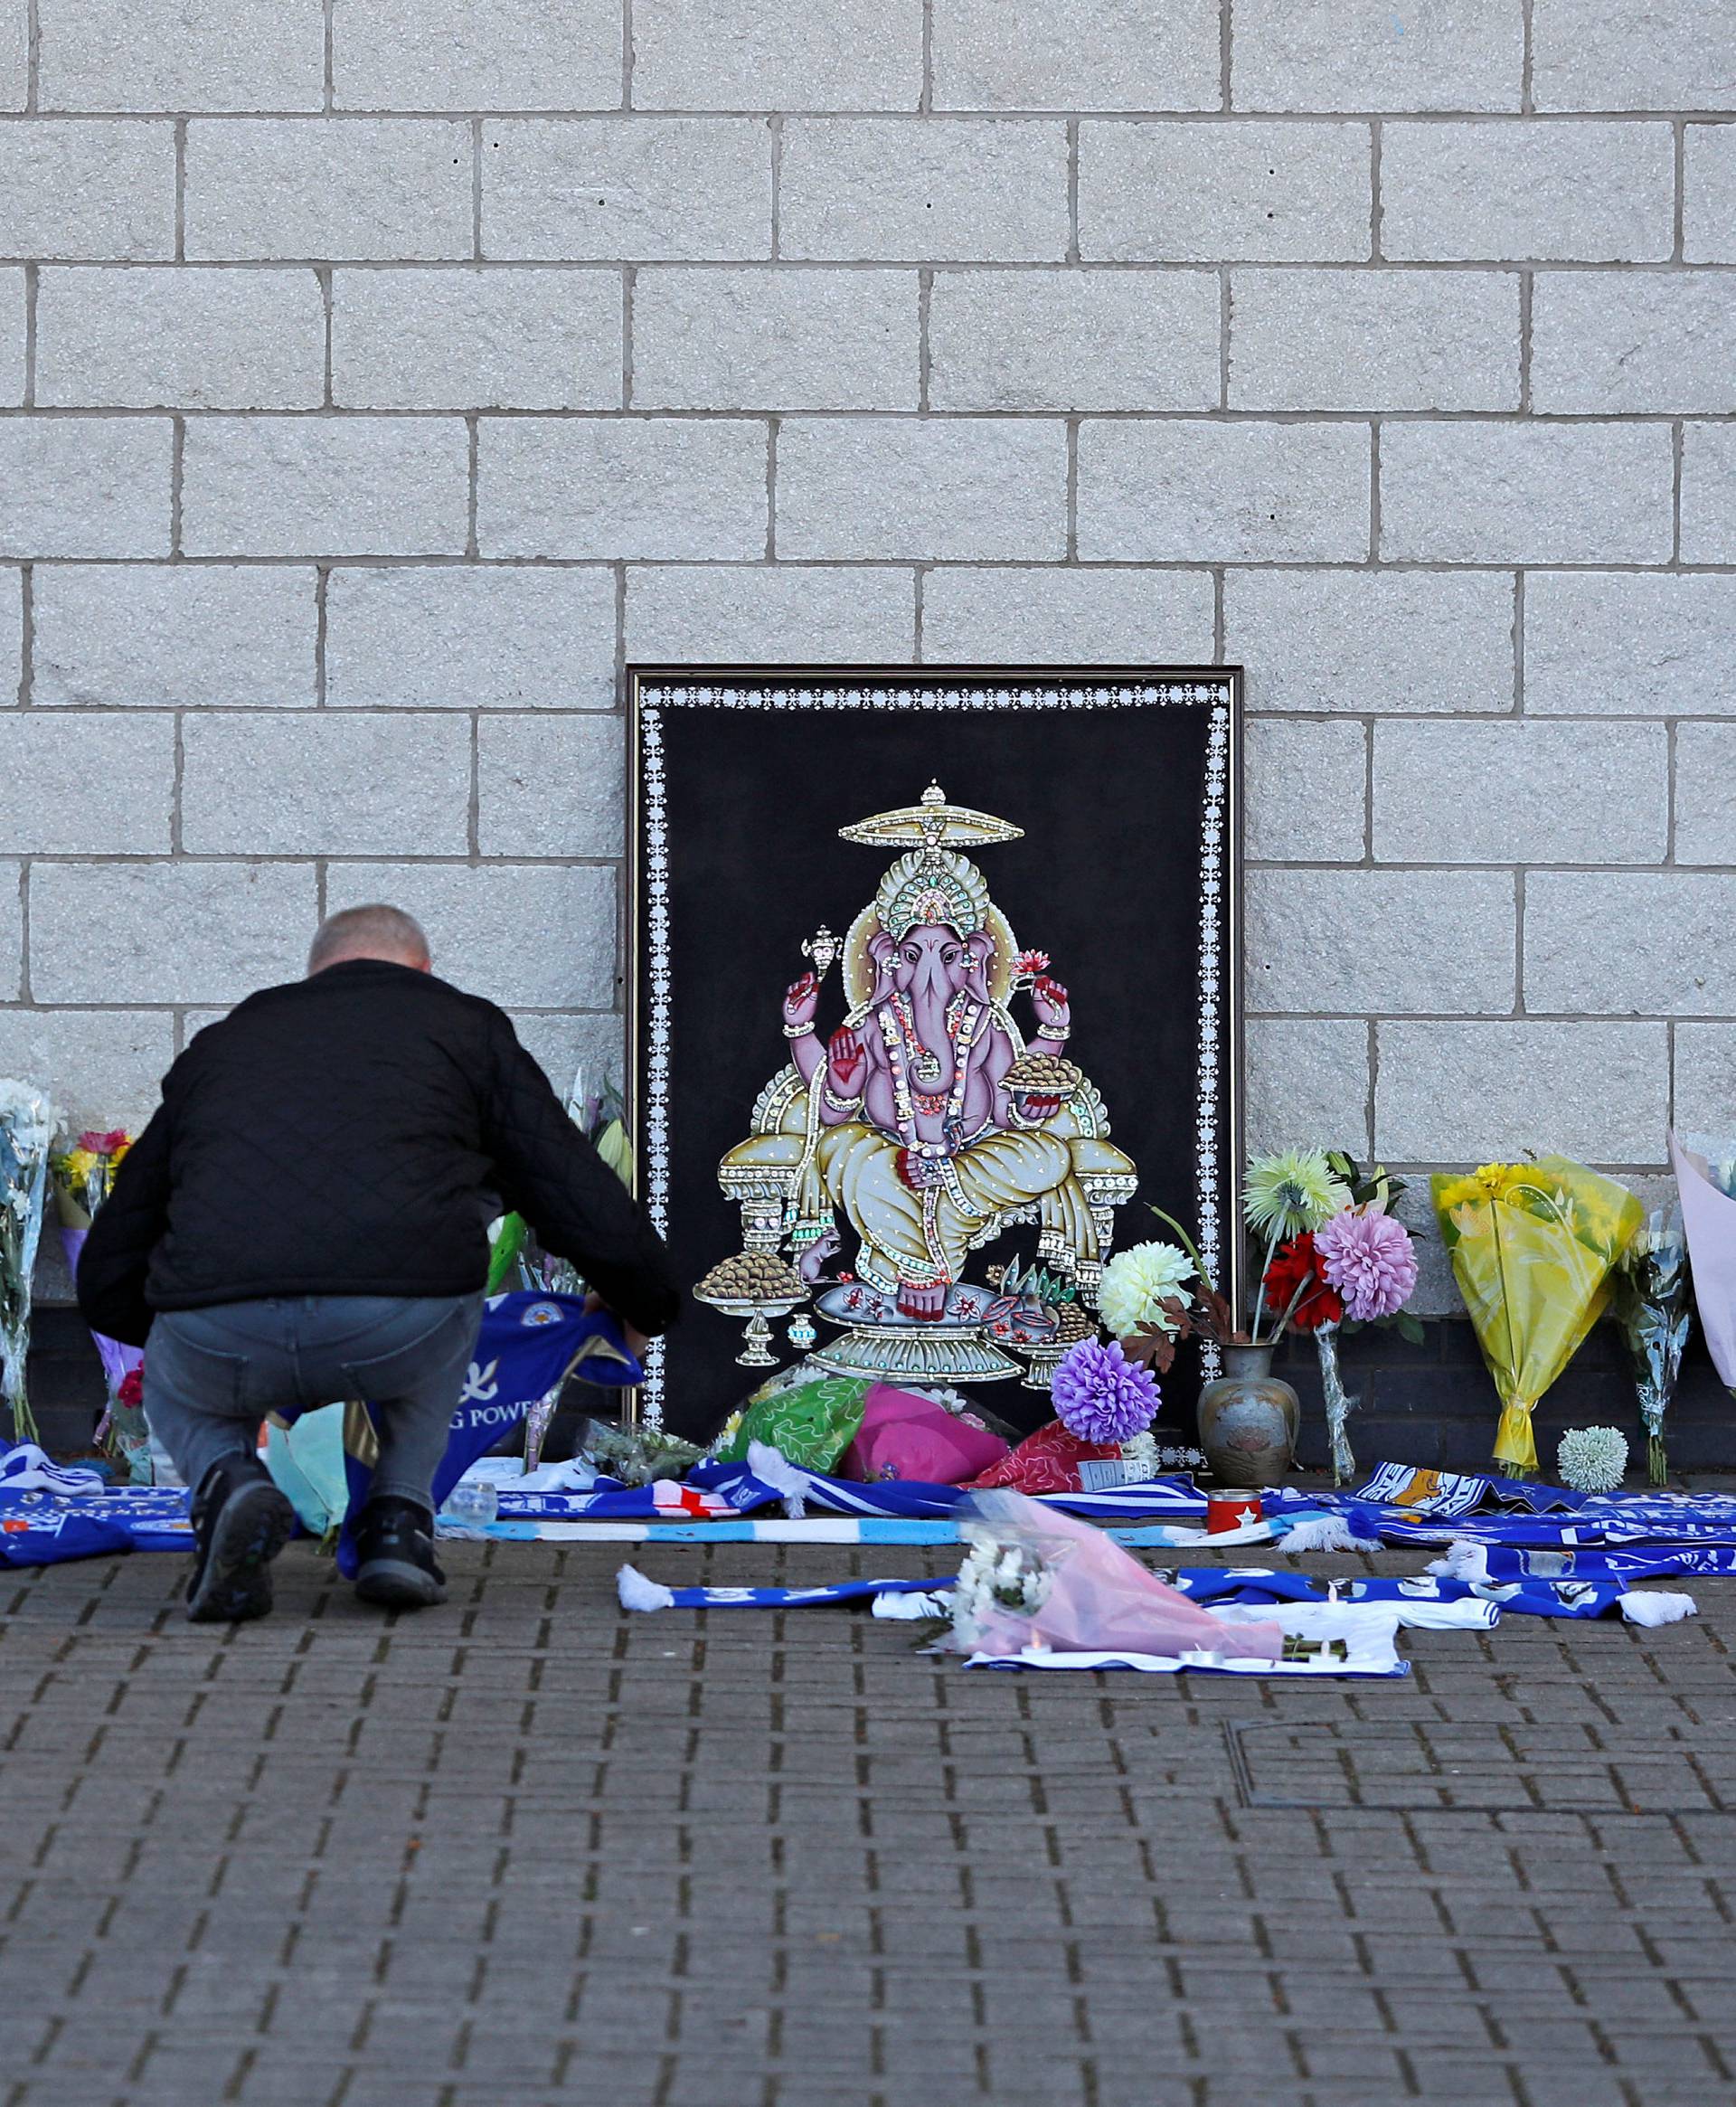 Leicester City football fans pay their respects outside the football stadium, after the helicopter of the club owner Thai businessman Vichai Srivaddhanaprabha crashed when leaving the ground on Saturday evening after the match, in Leicester